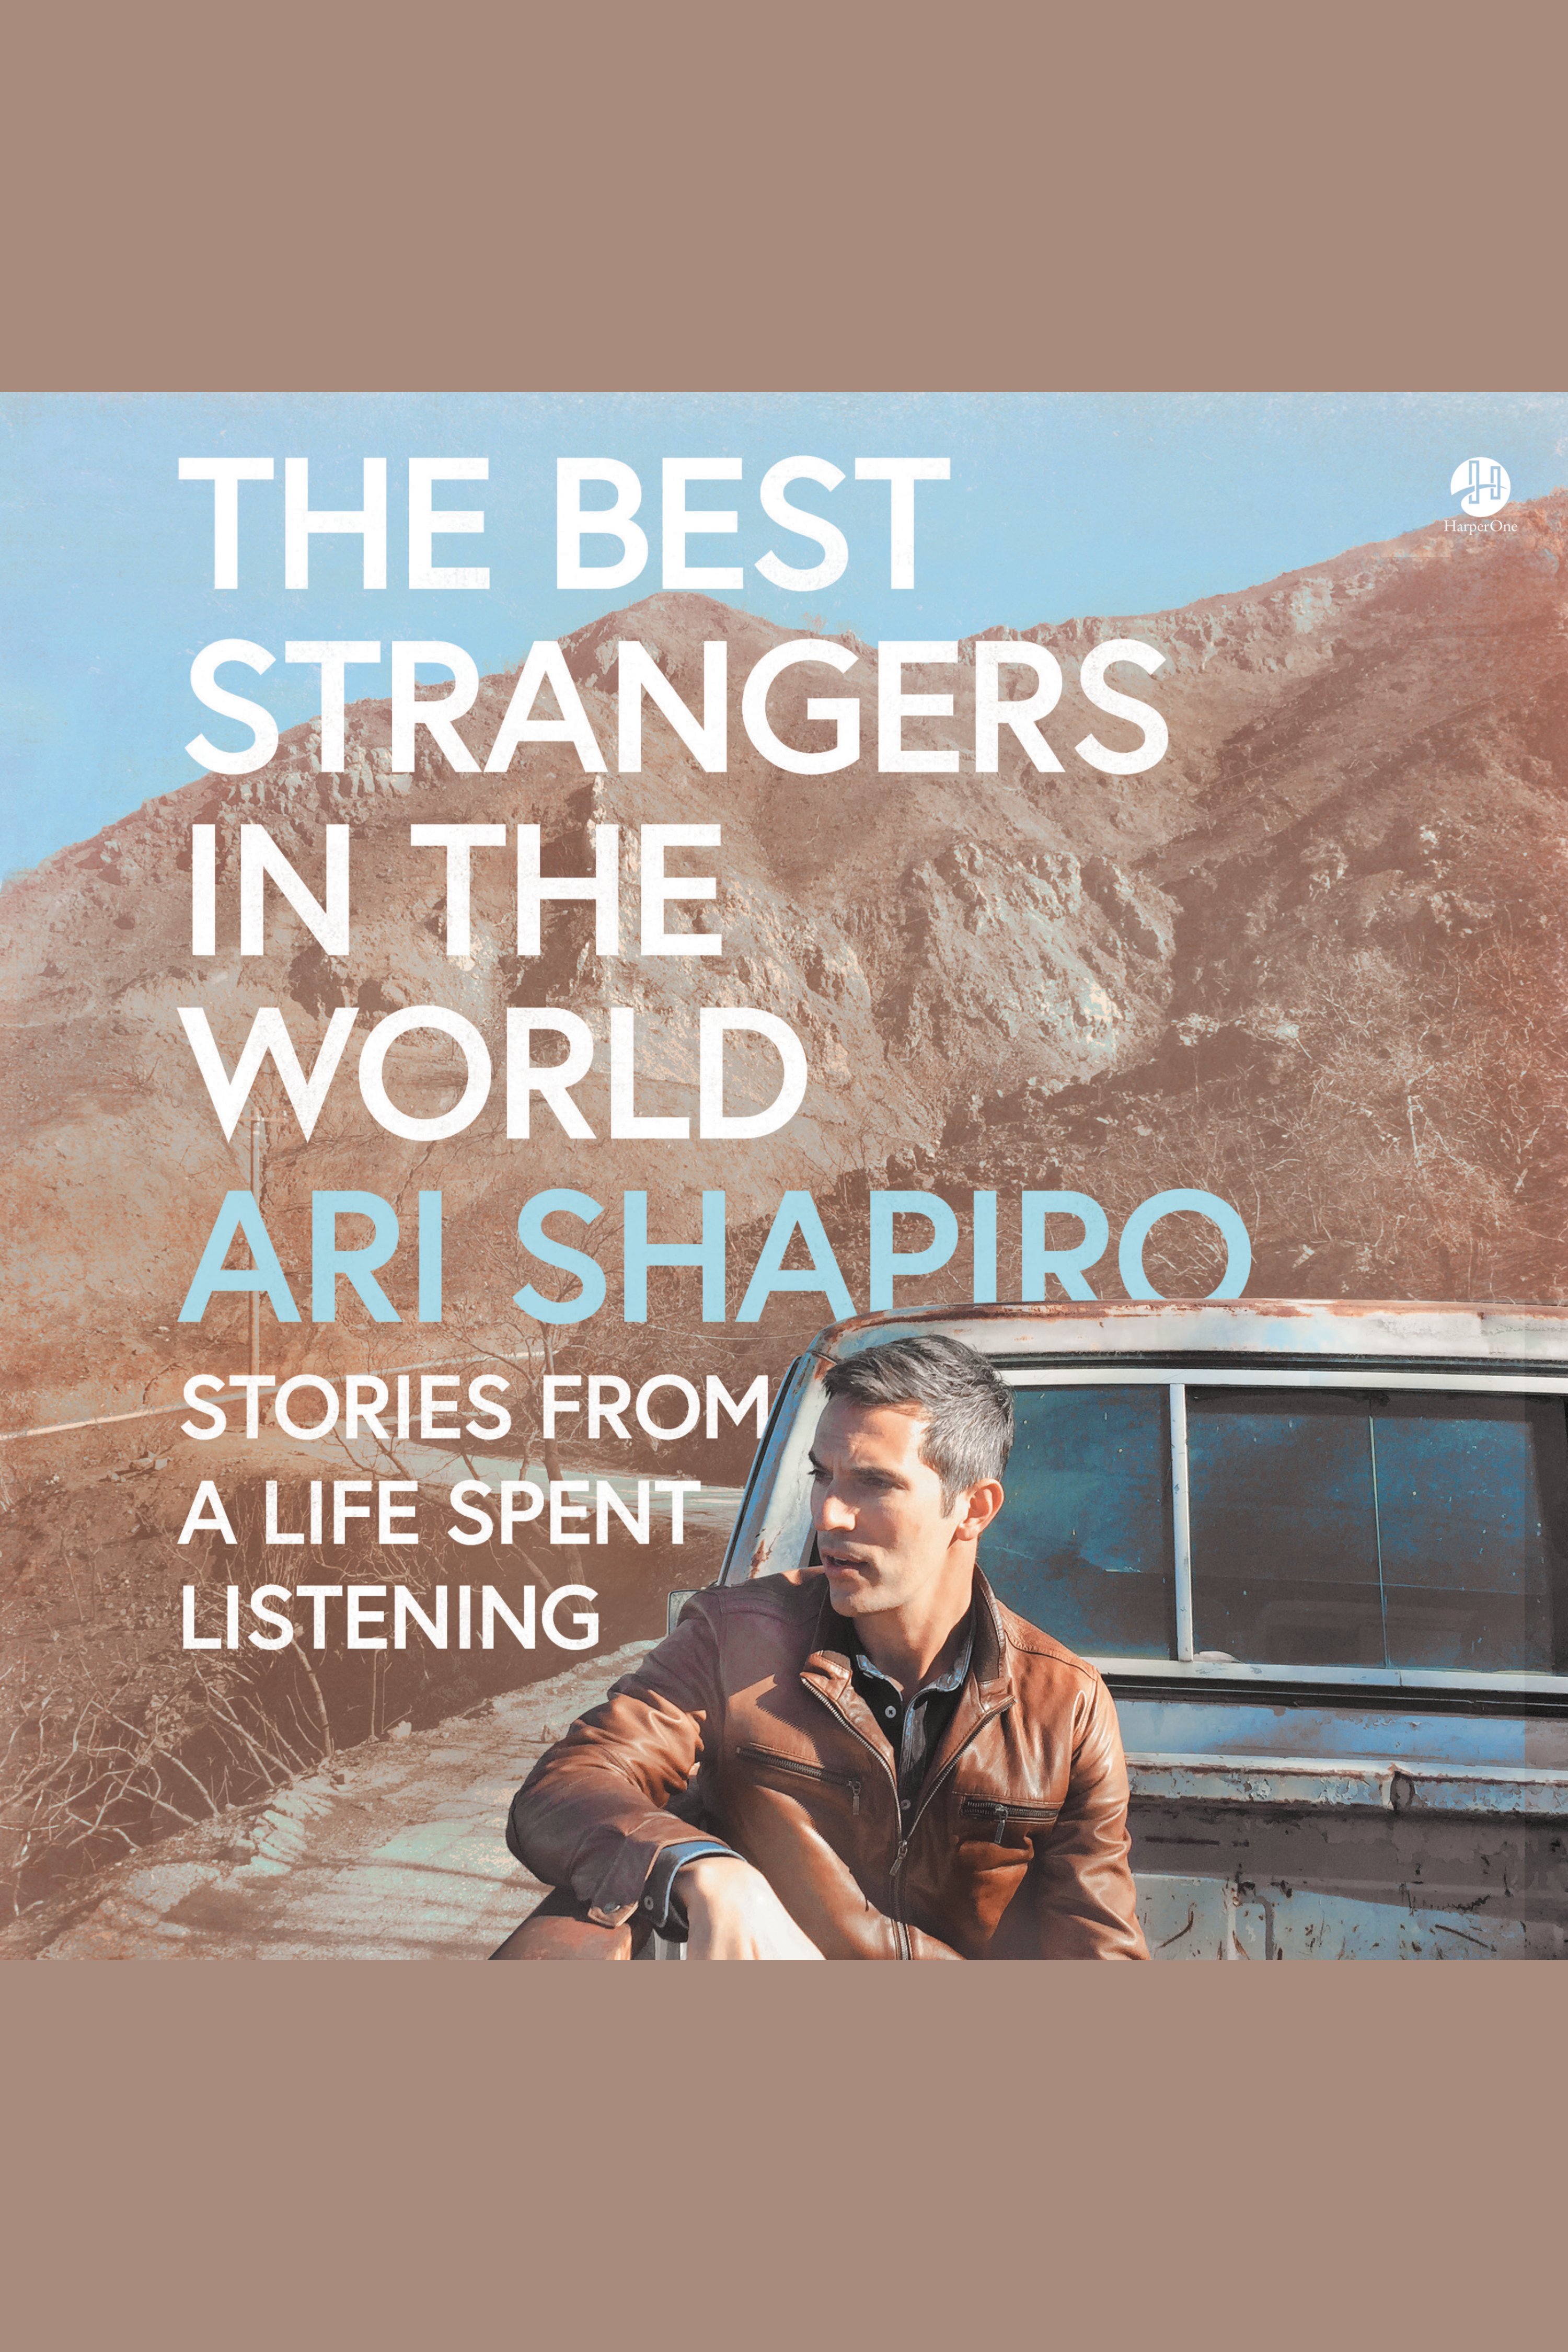 The Best Strangers in the World Stories from a Life Spent Listening cover image